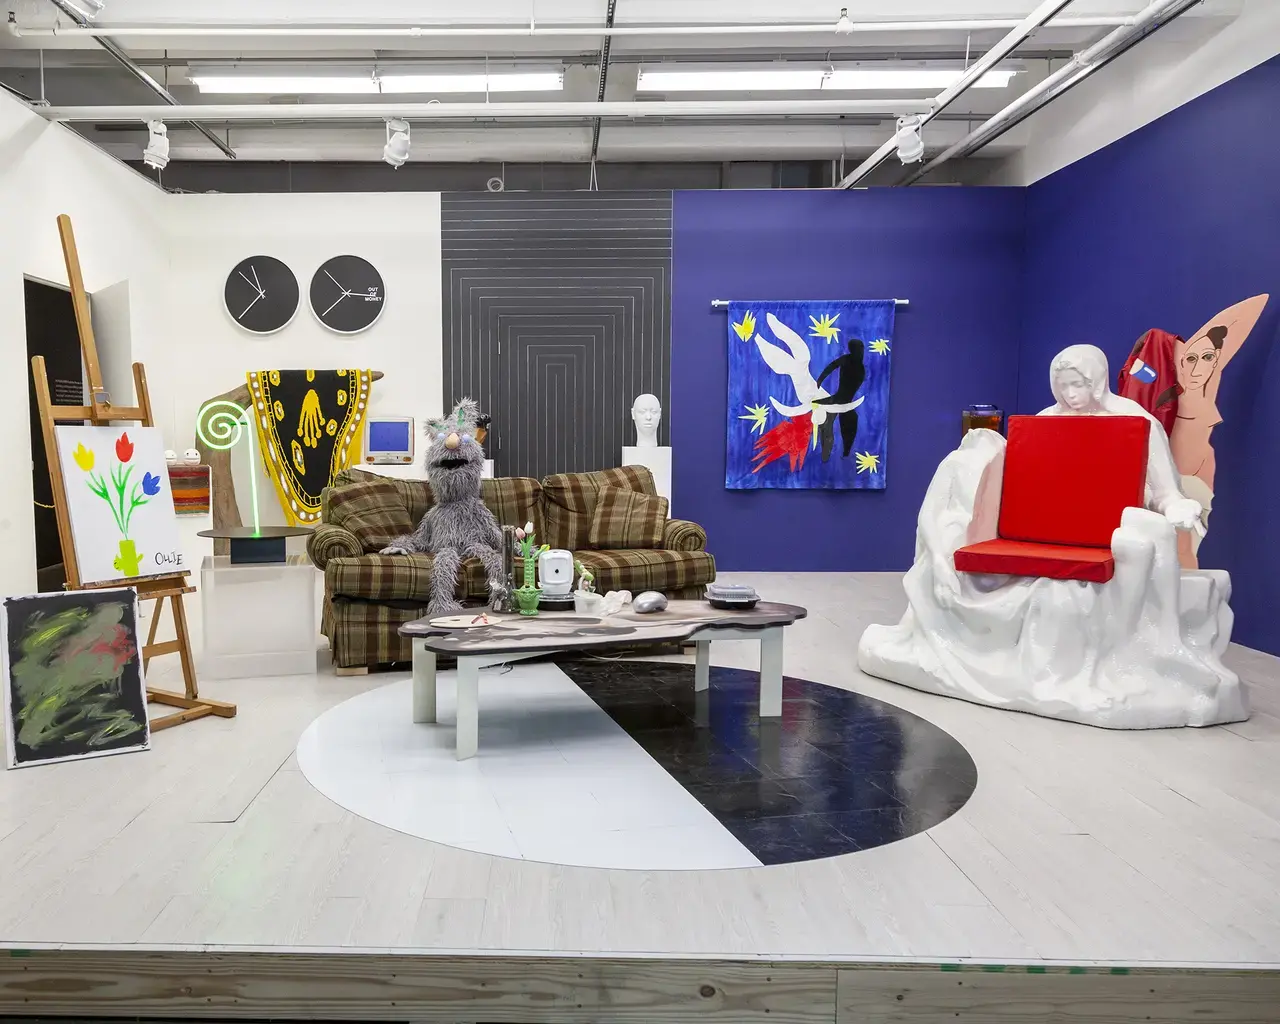 Jayson Musson, in collaboration with The Fabric Workshop and Museum, Jayson Musson:&nbsp;His History of Art, 2022, installation view, Philadelphia, PA. Photo by Carlos Avendaño.